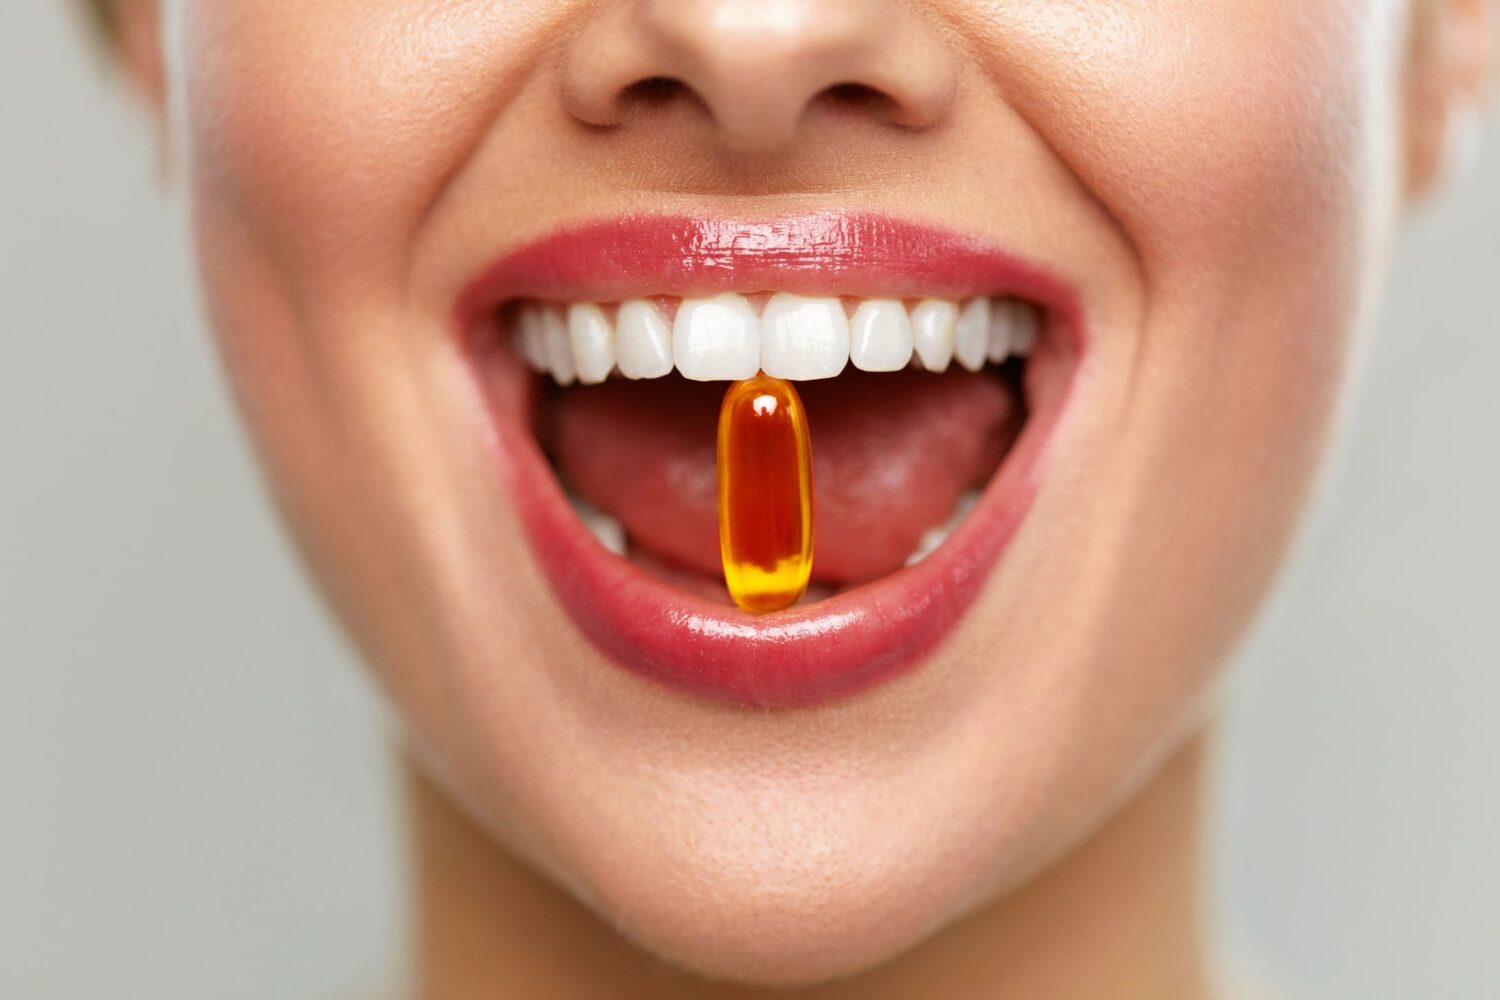 6 Nutrients That Boost Oral Health